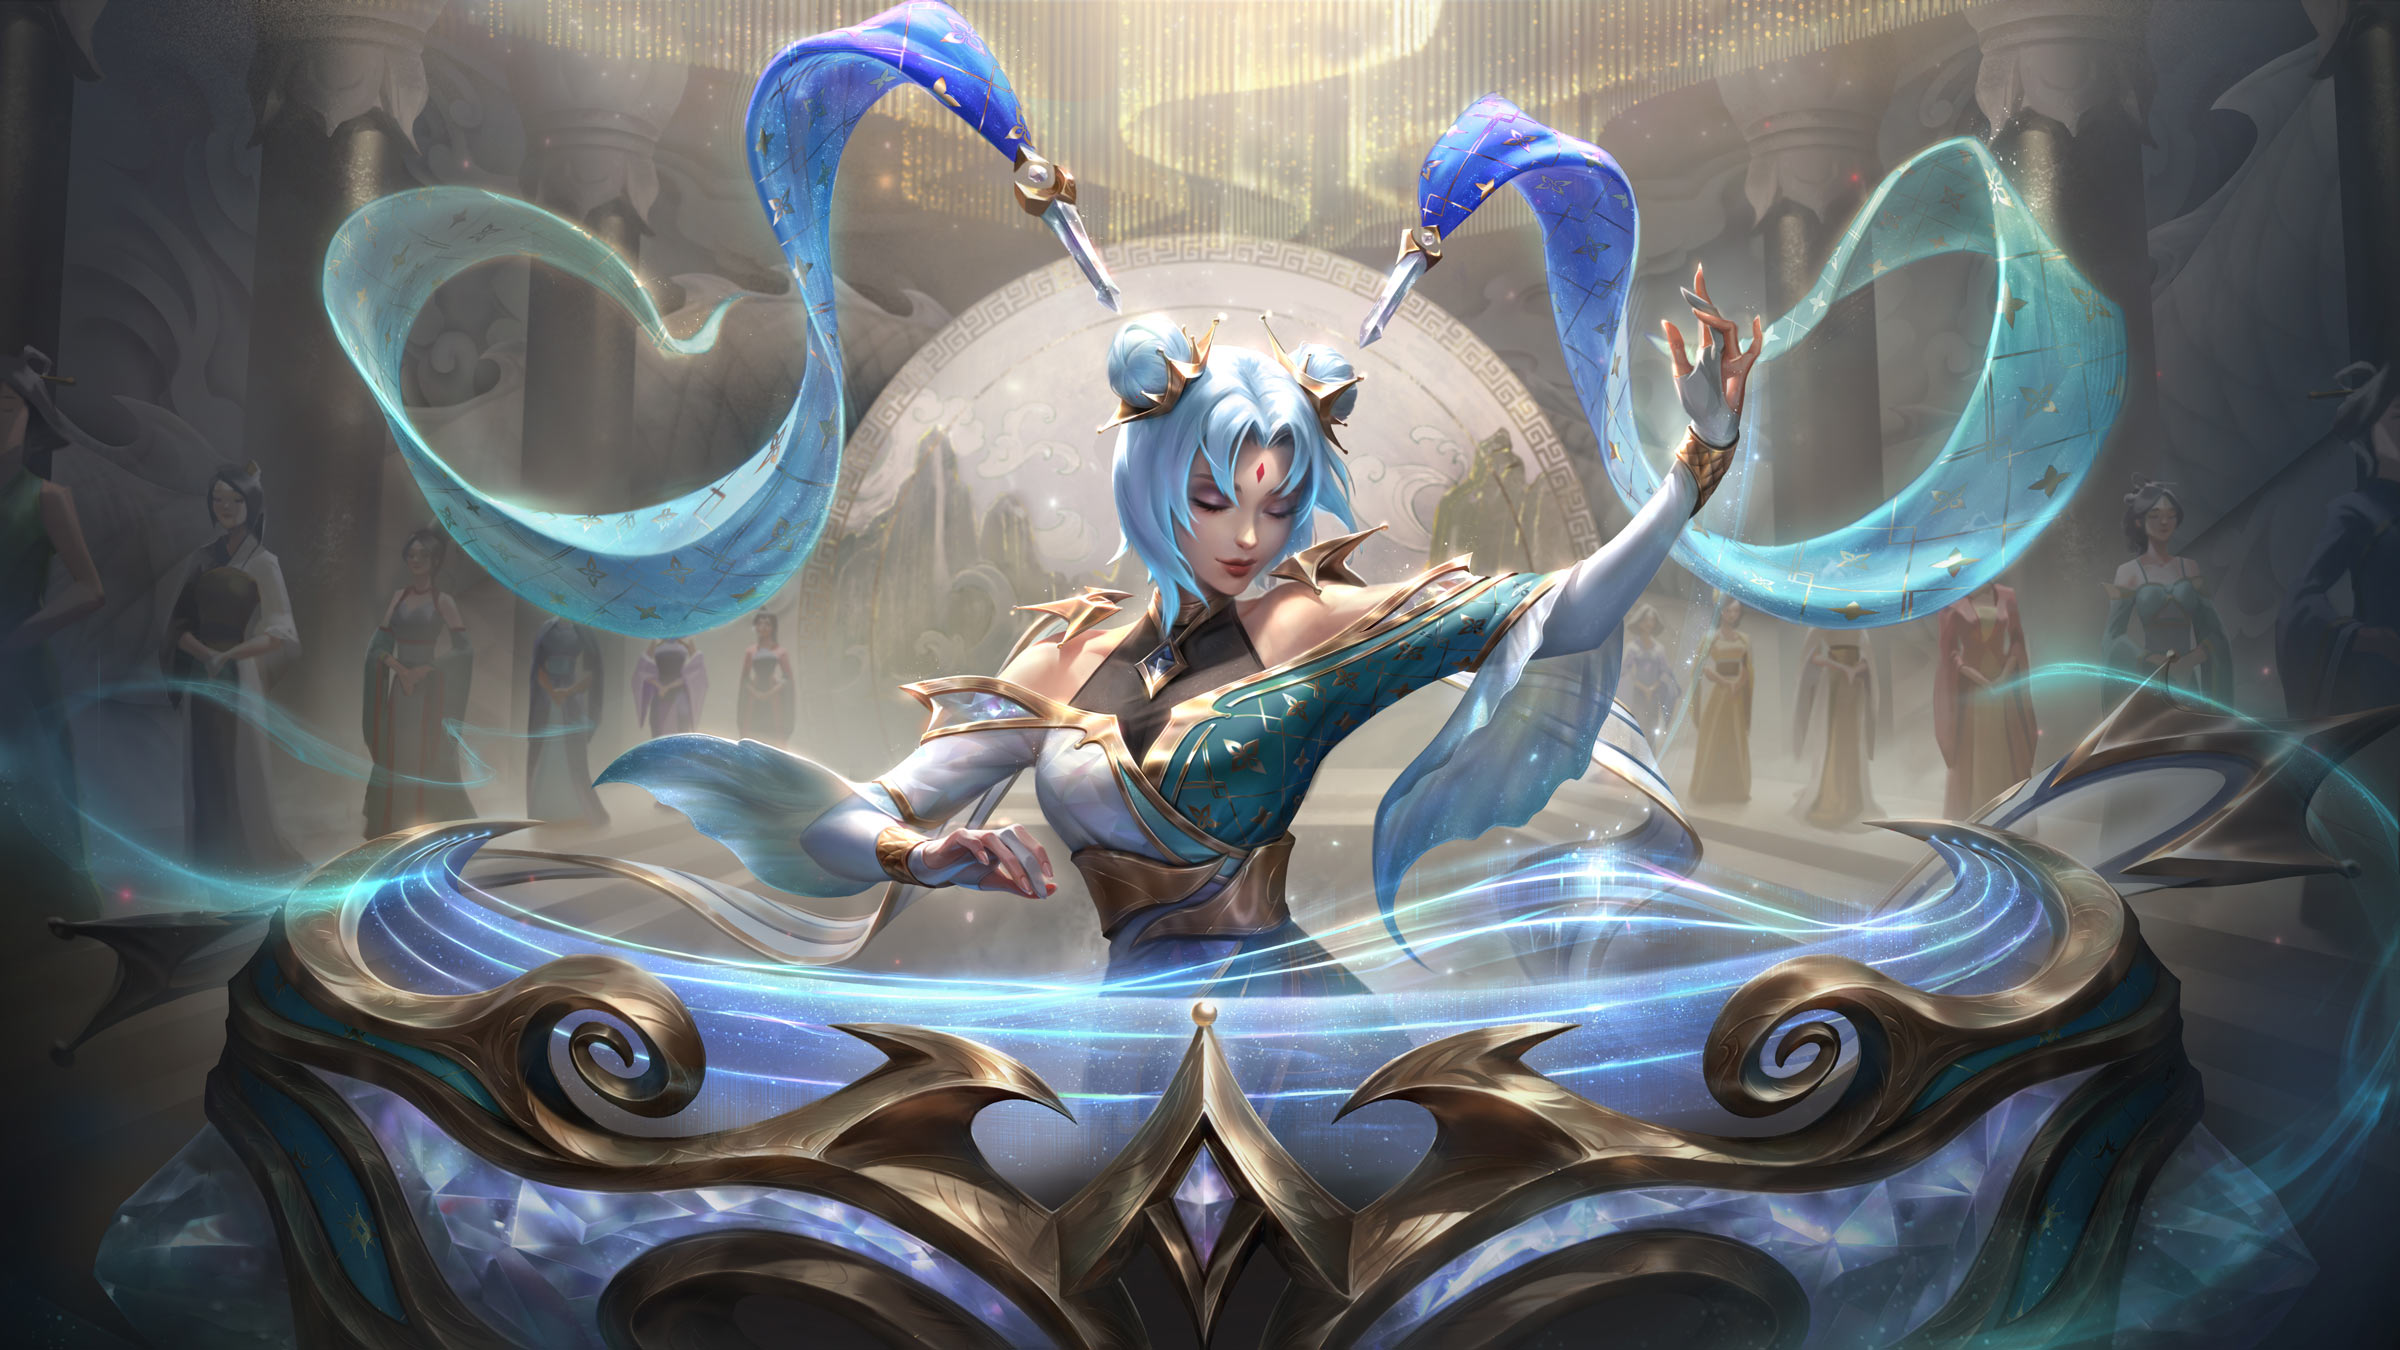 Patch 13.16 notes